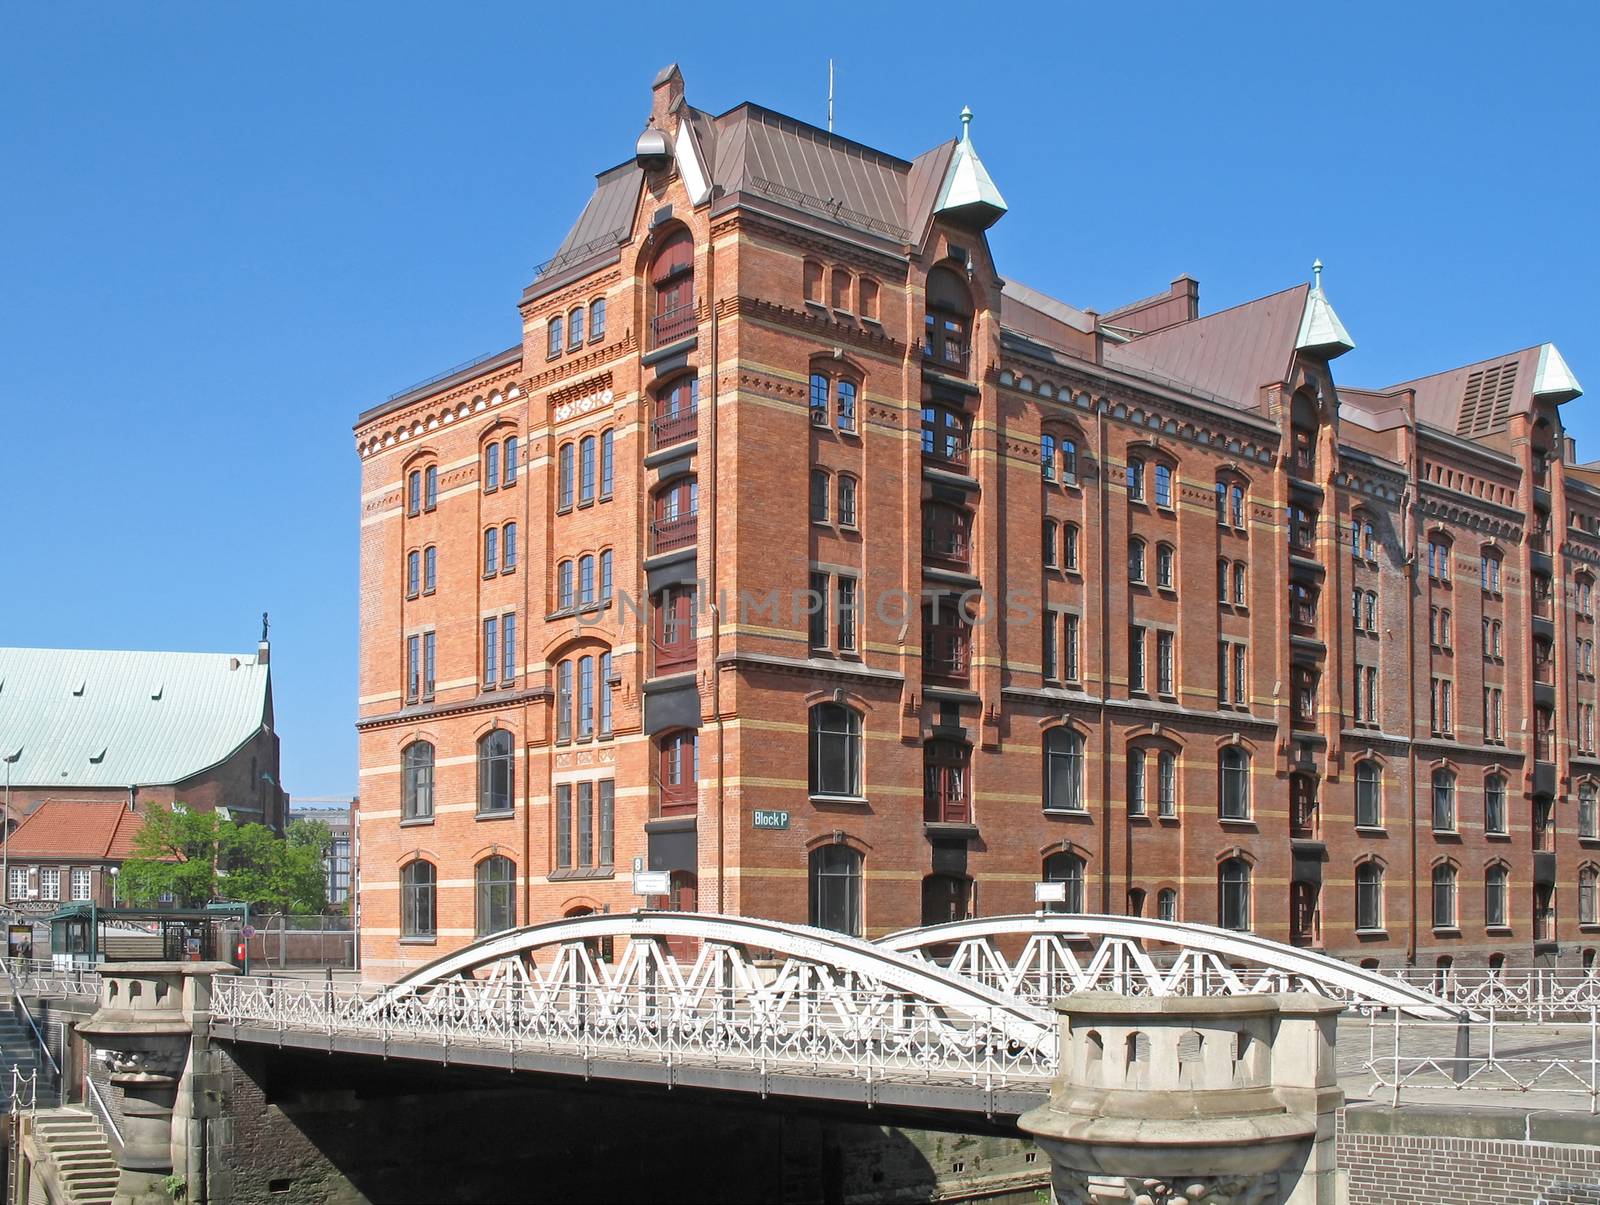 The Speicherstadt is an ensemble of warehouses in Hamburg, Germany.